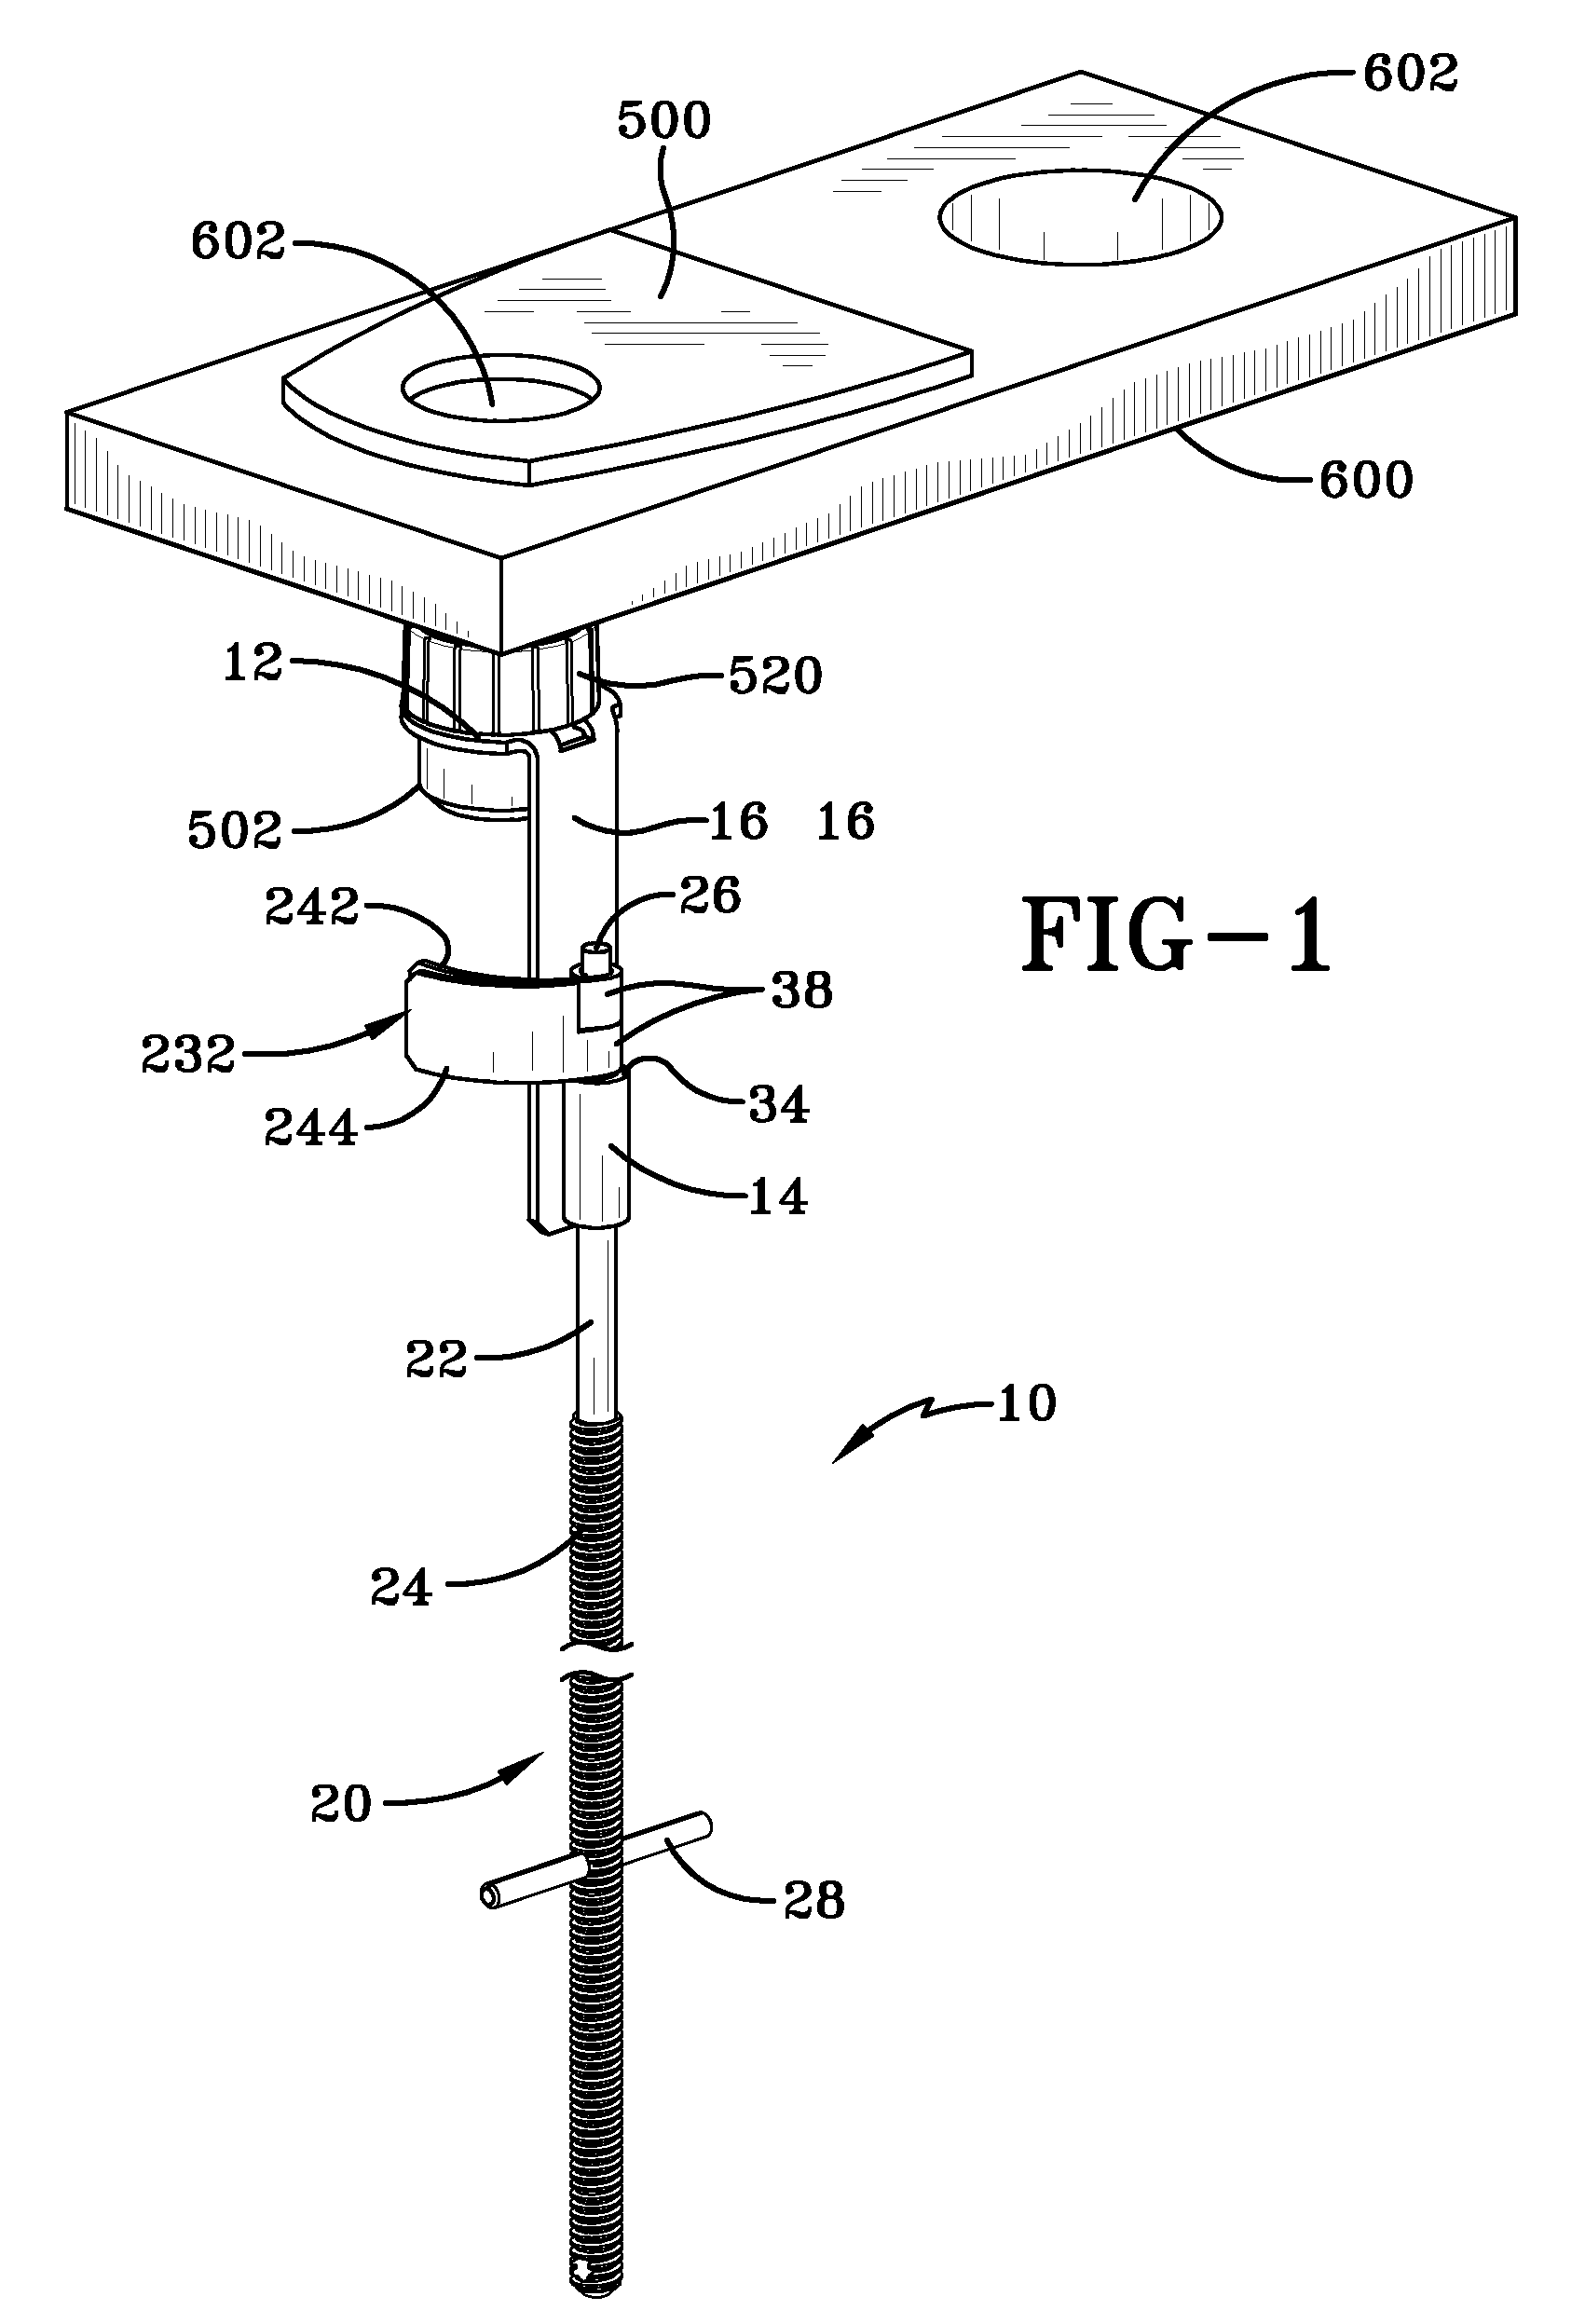 Apparatus and method for mounting a plumbing fixture